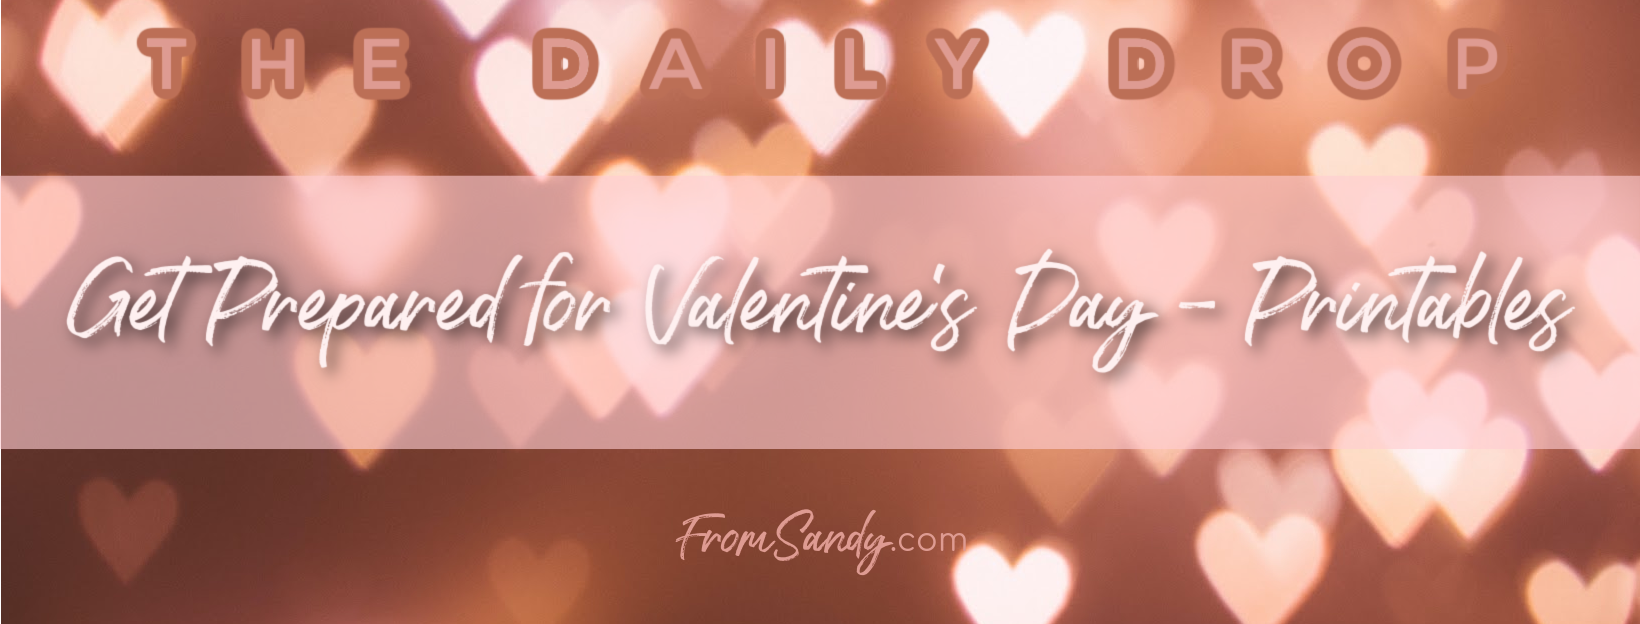 Get Prepared for Valentine's Day - Printables, From Sandy